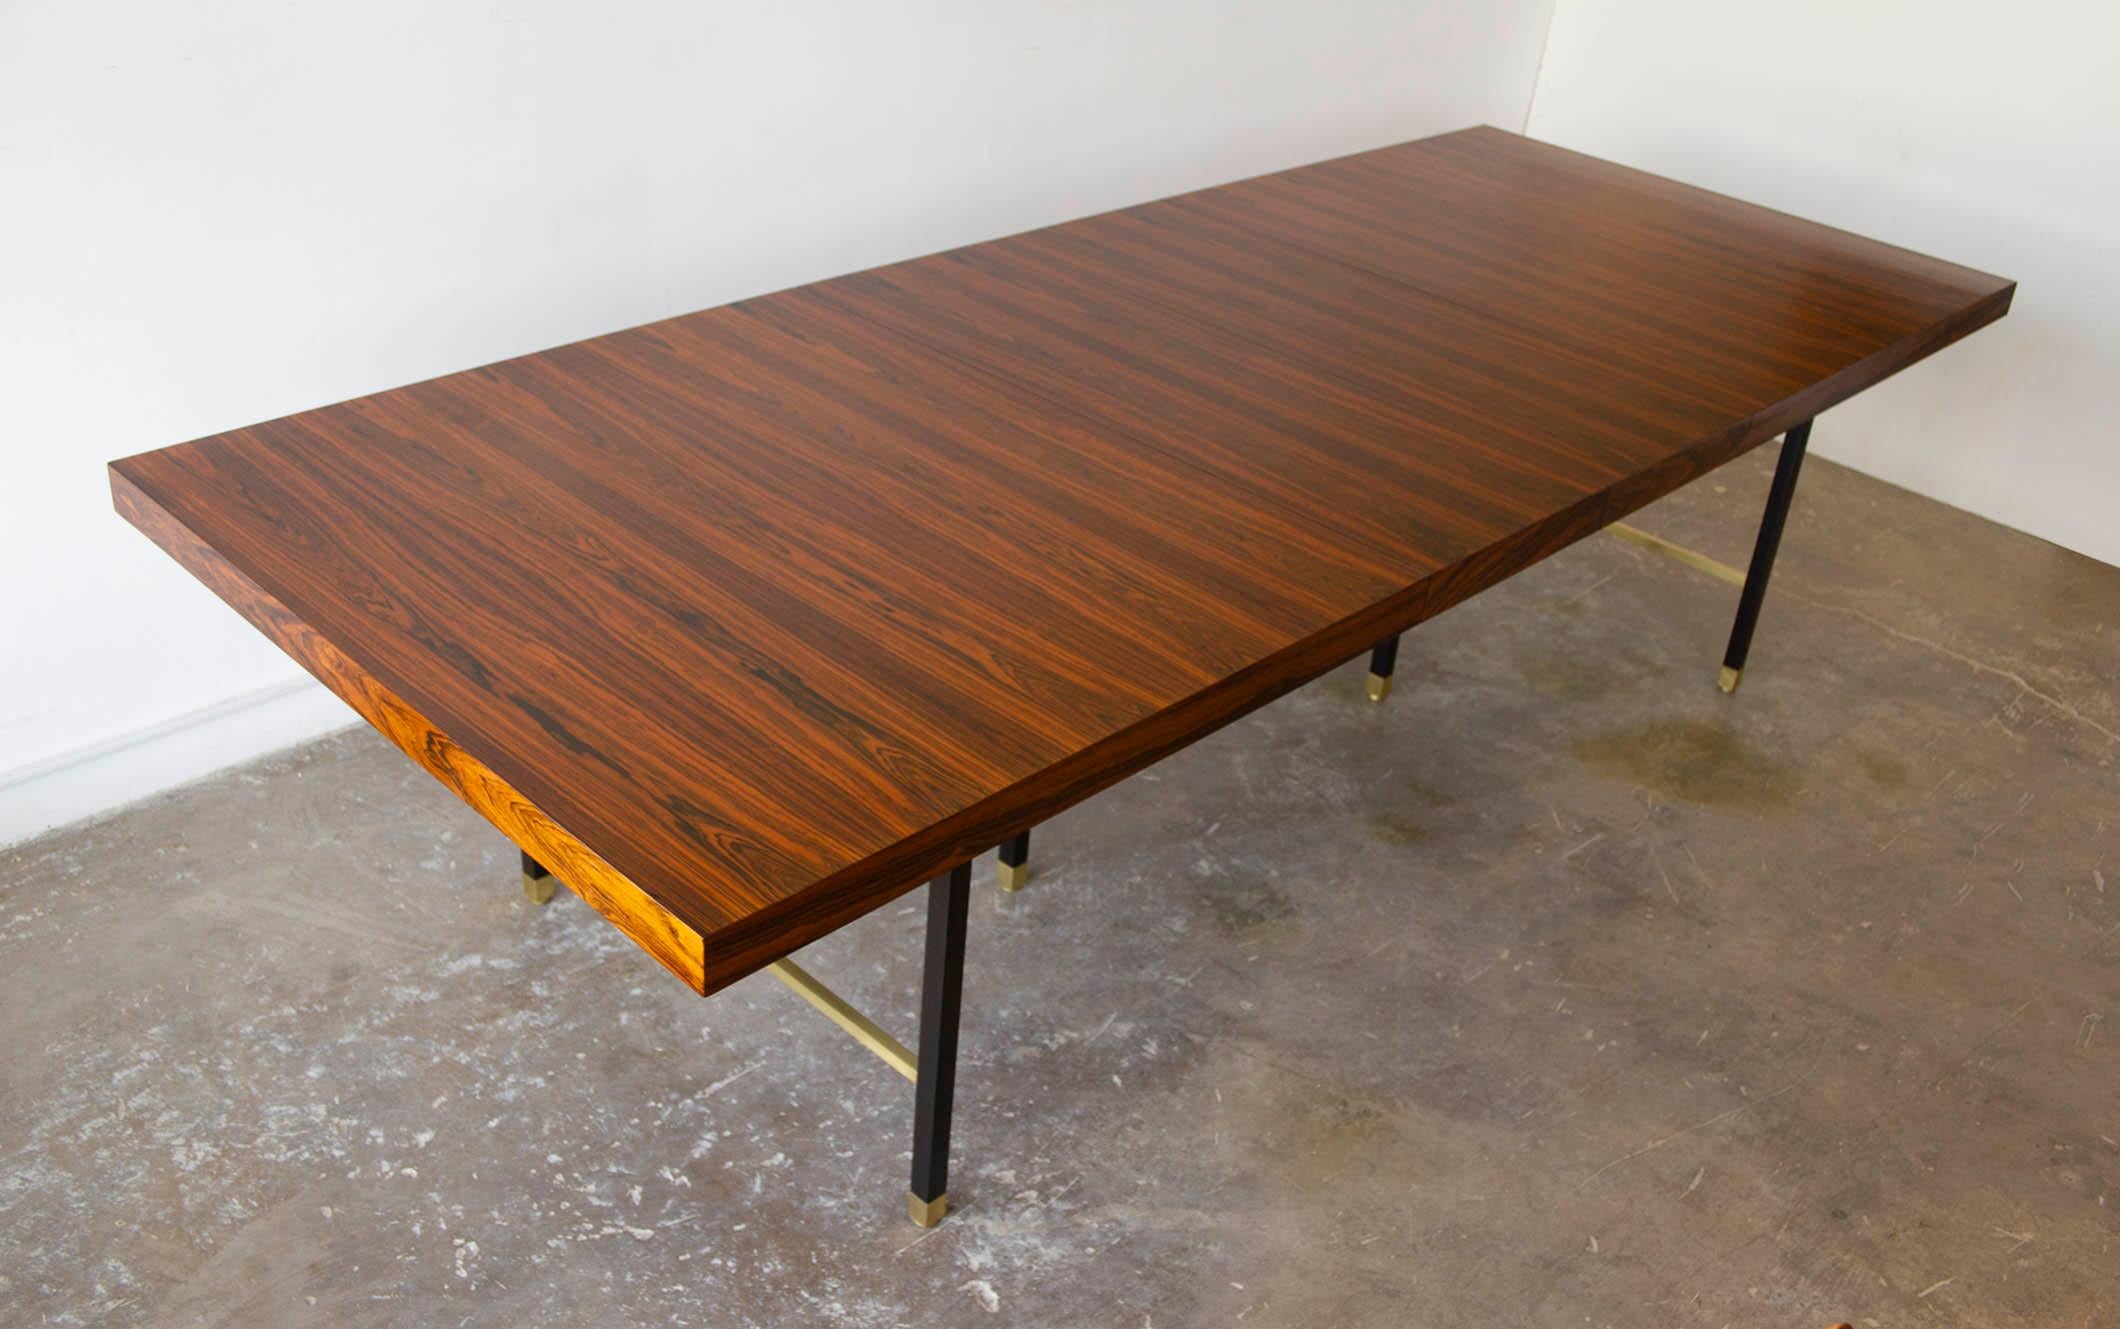 Brazilian rosewood Harvey Probber architectural dining table with mahogany clad solid steel legs and solid brass stretchers. The tables measures 80 x 44 x 29